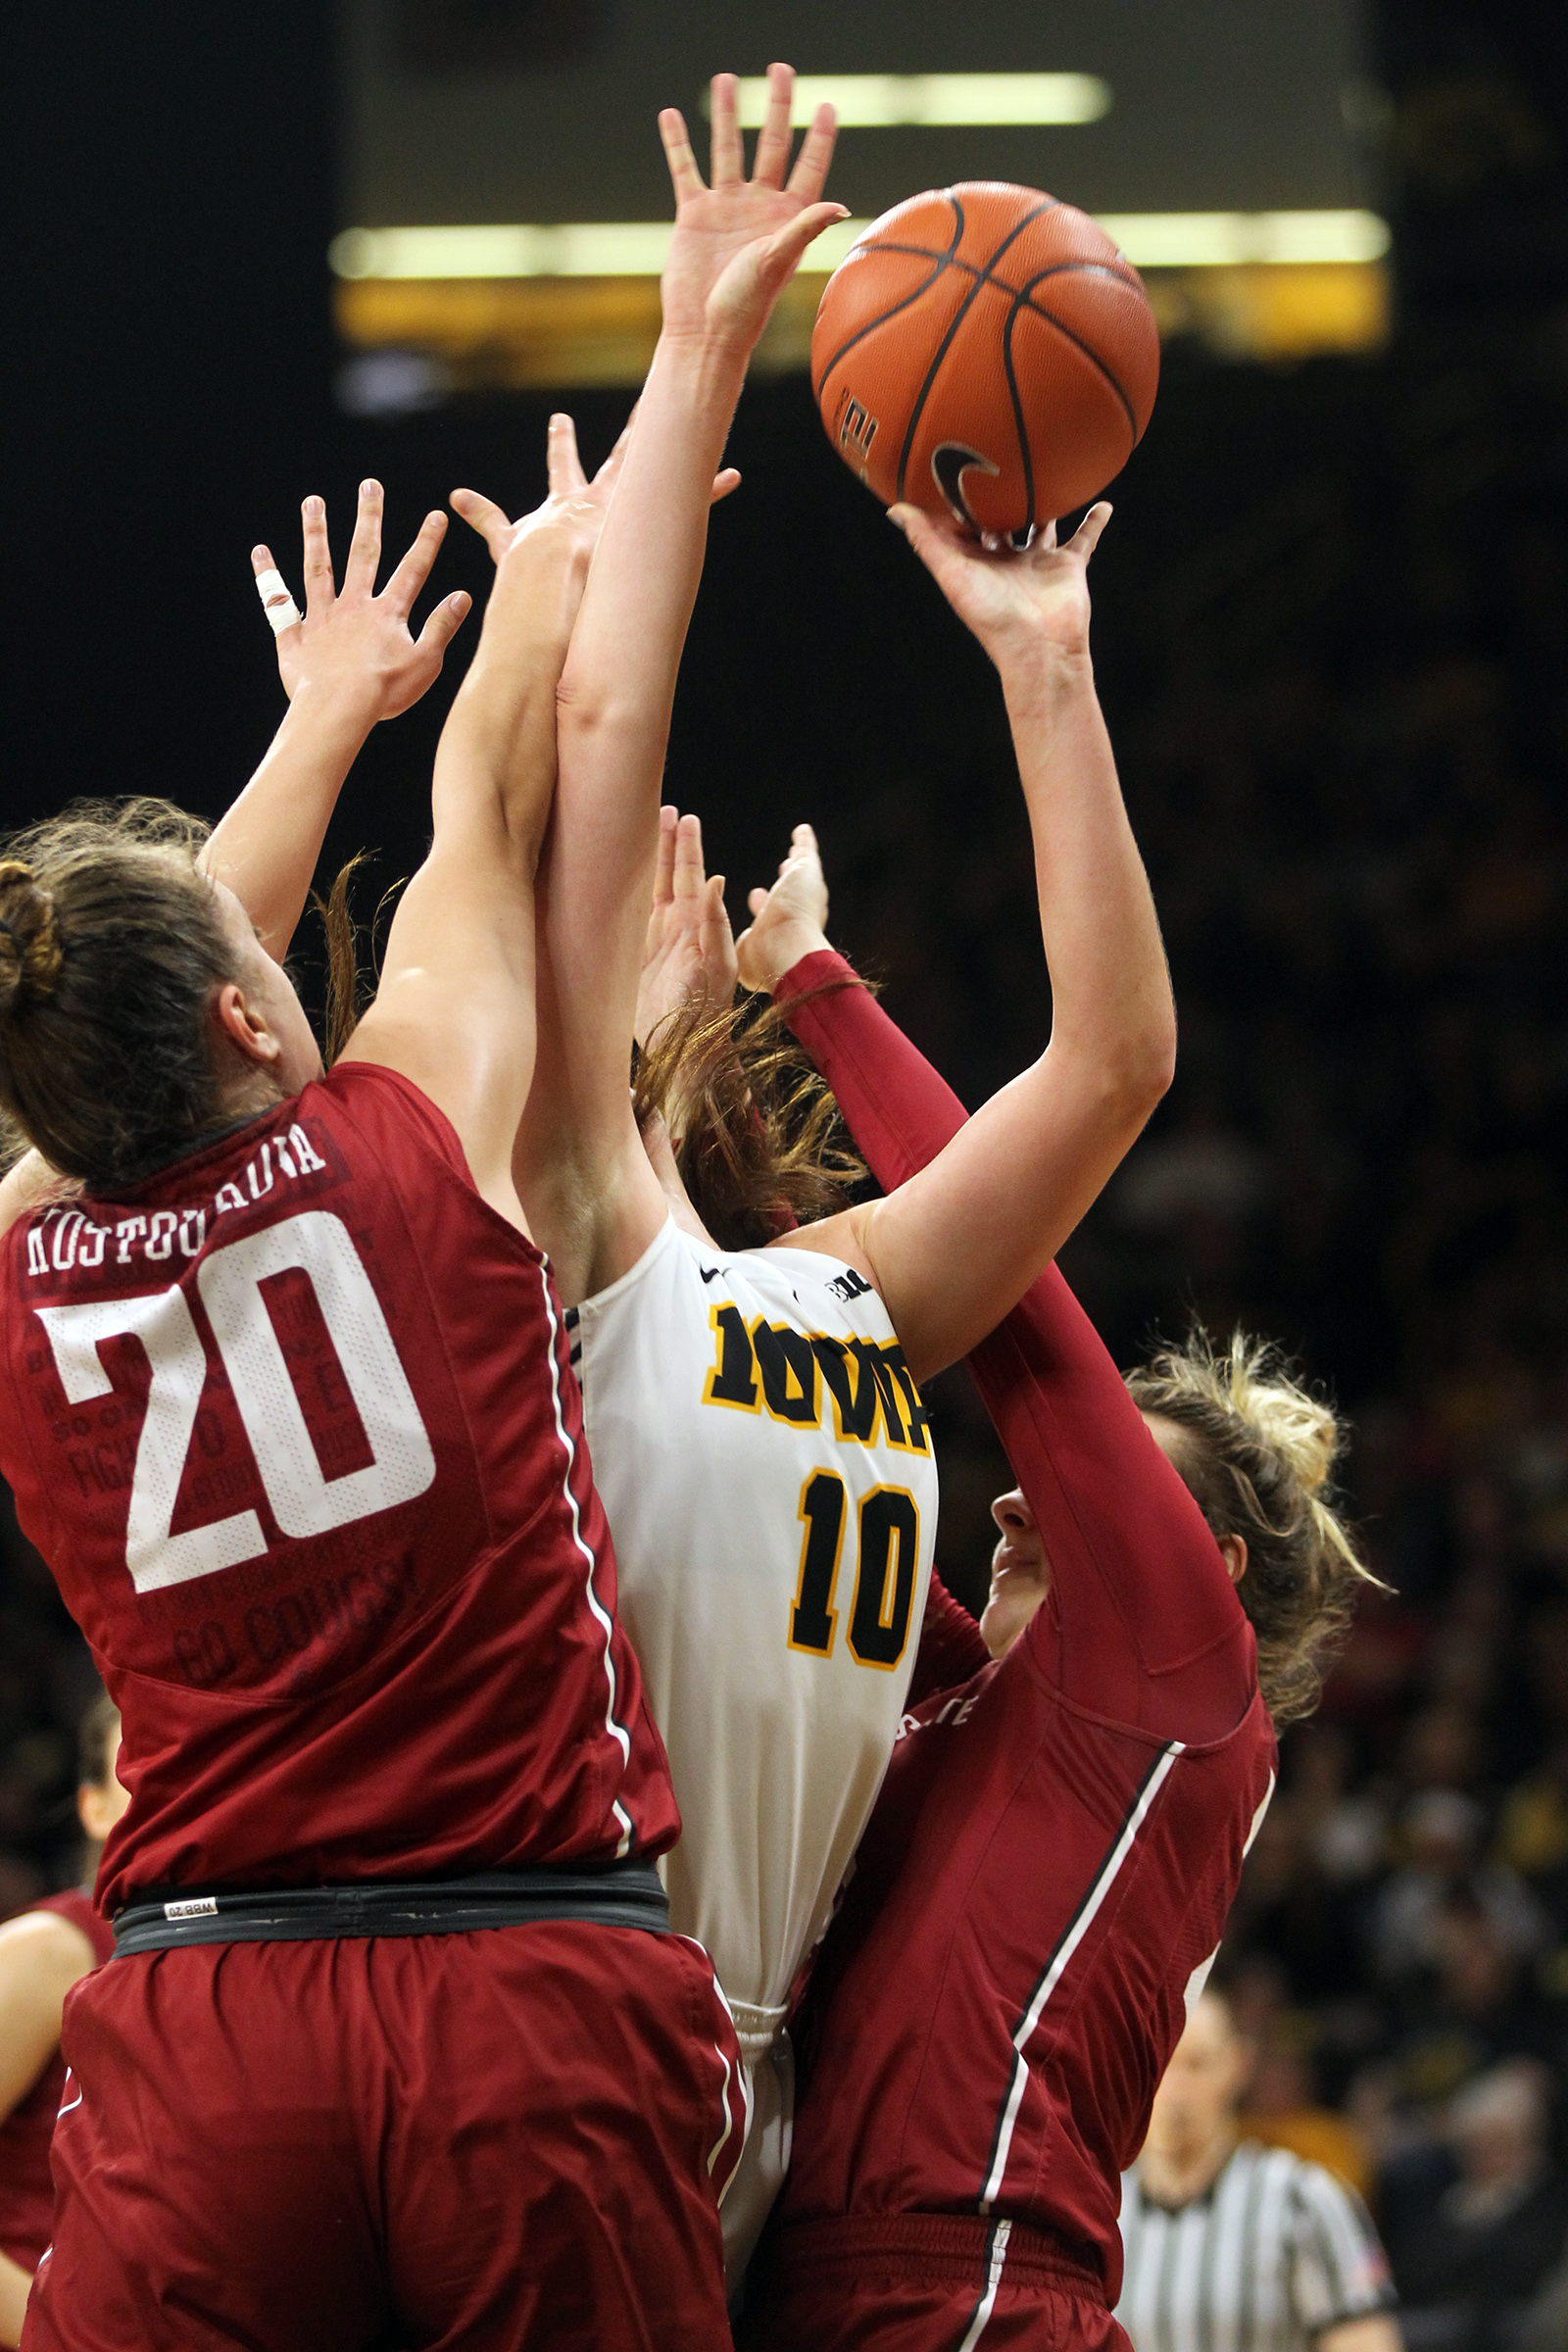  Iowa's Megan Gustafson takes a contested shot during the Hawkeyes' WNIT Elite Eight game against Washington State at Carver-Hawkeyes Arena. 